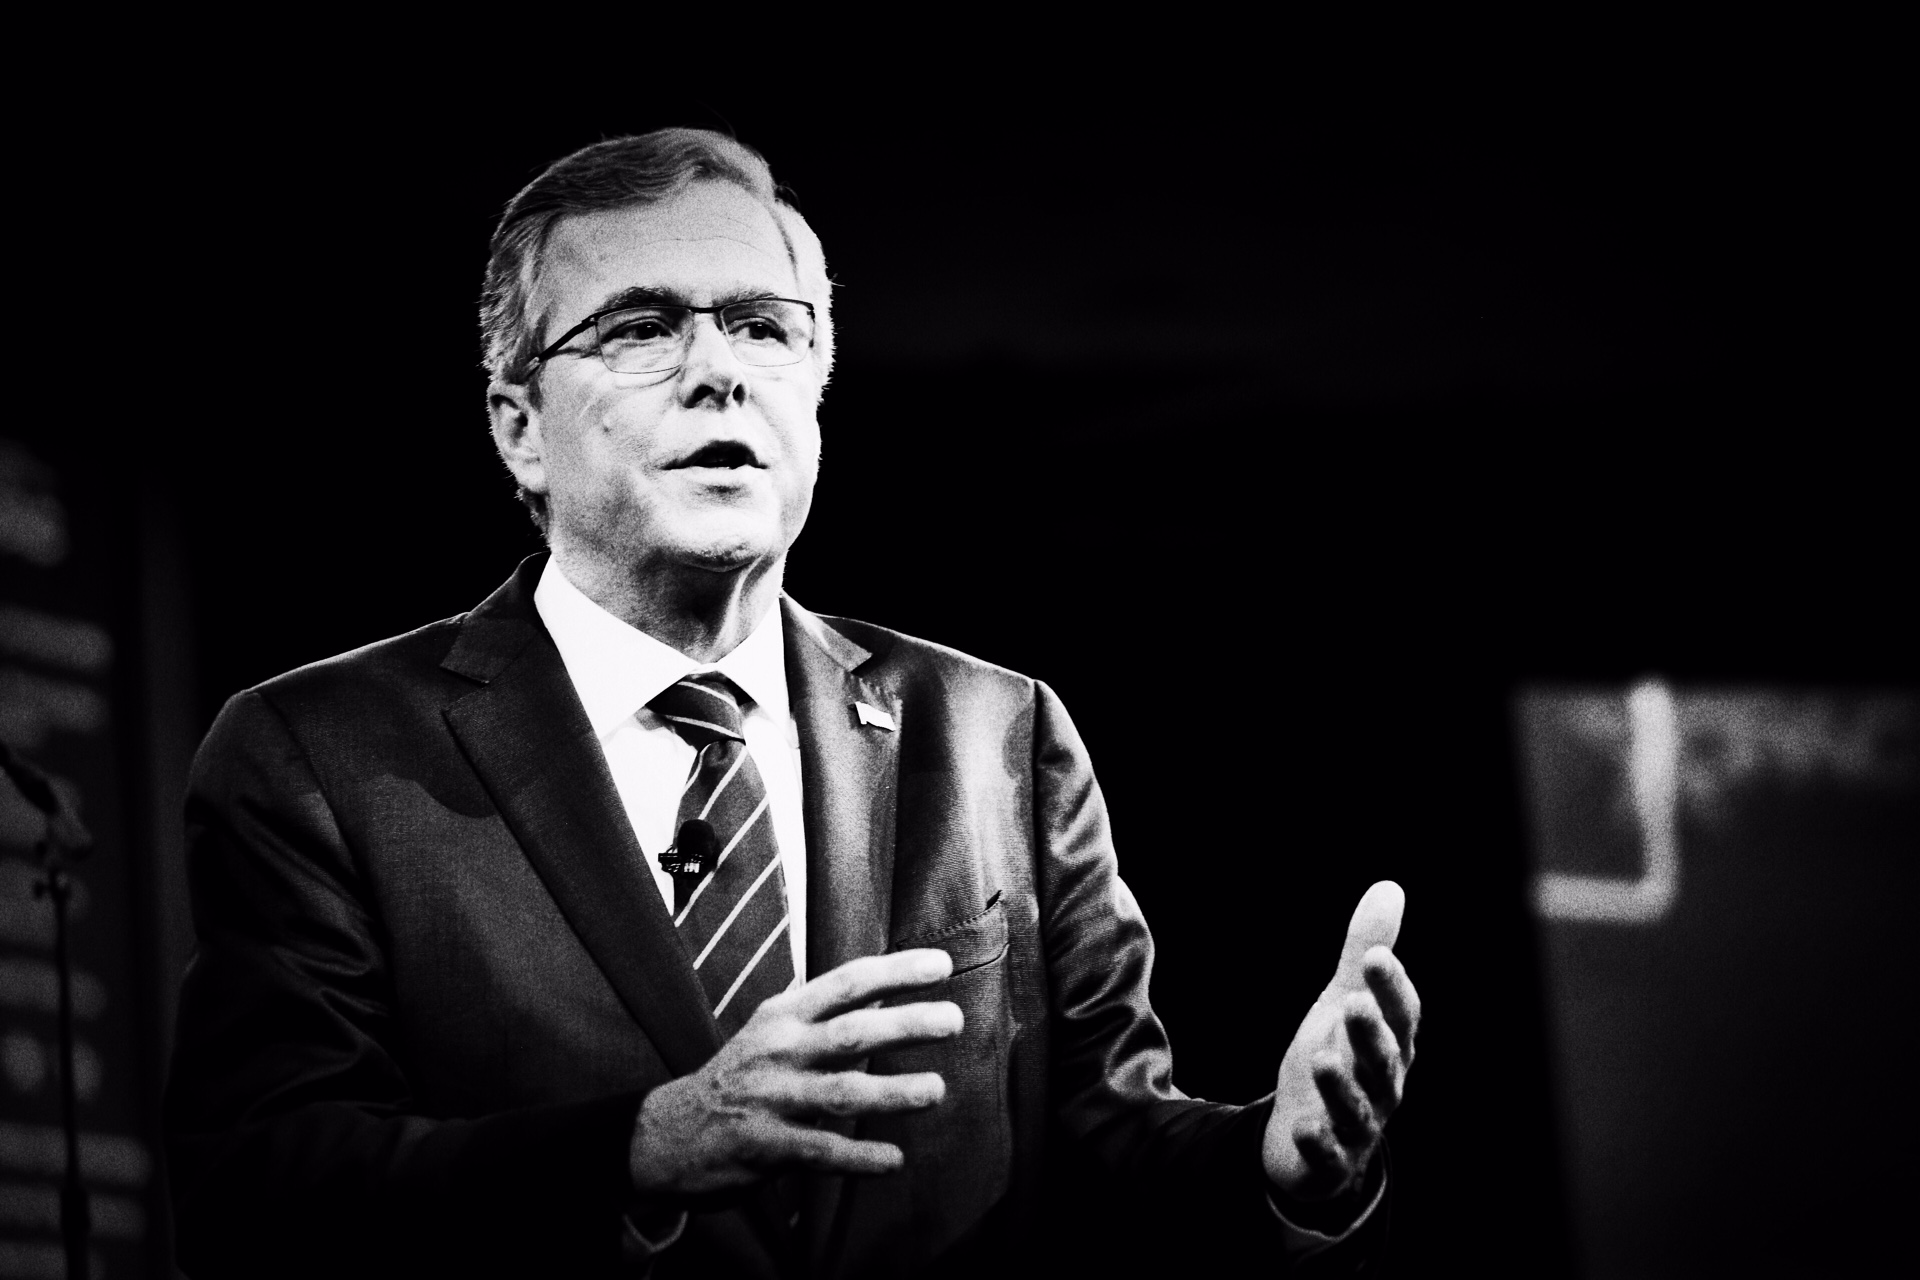 Jeb Bush speaks at CPAC in National Harbor, Md. on Feb. 27, 2015. (Mark Peterson—Redux for TIME)